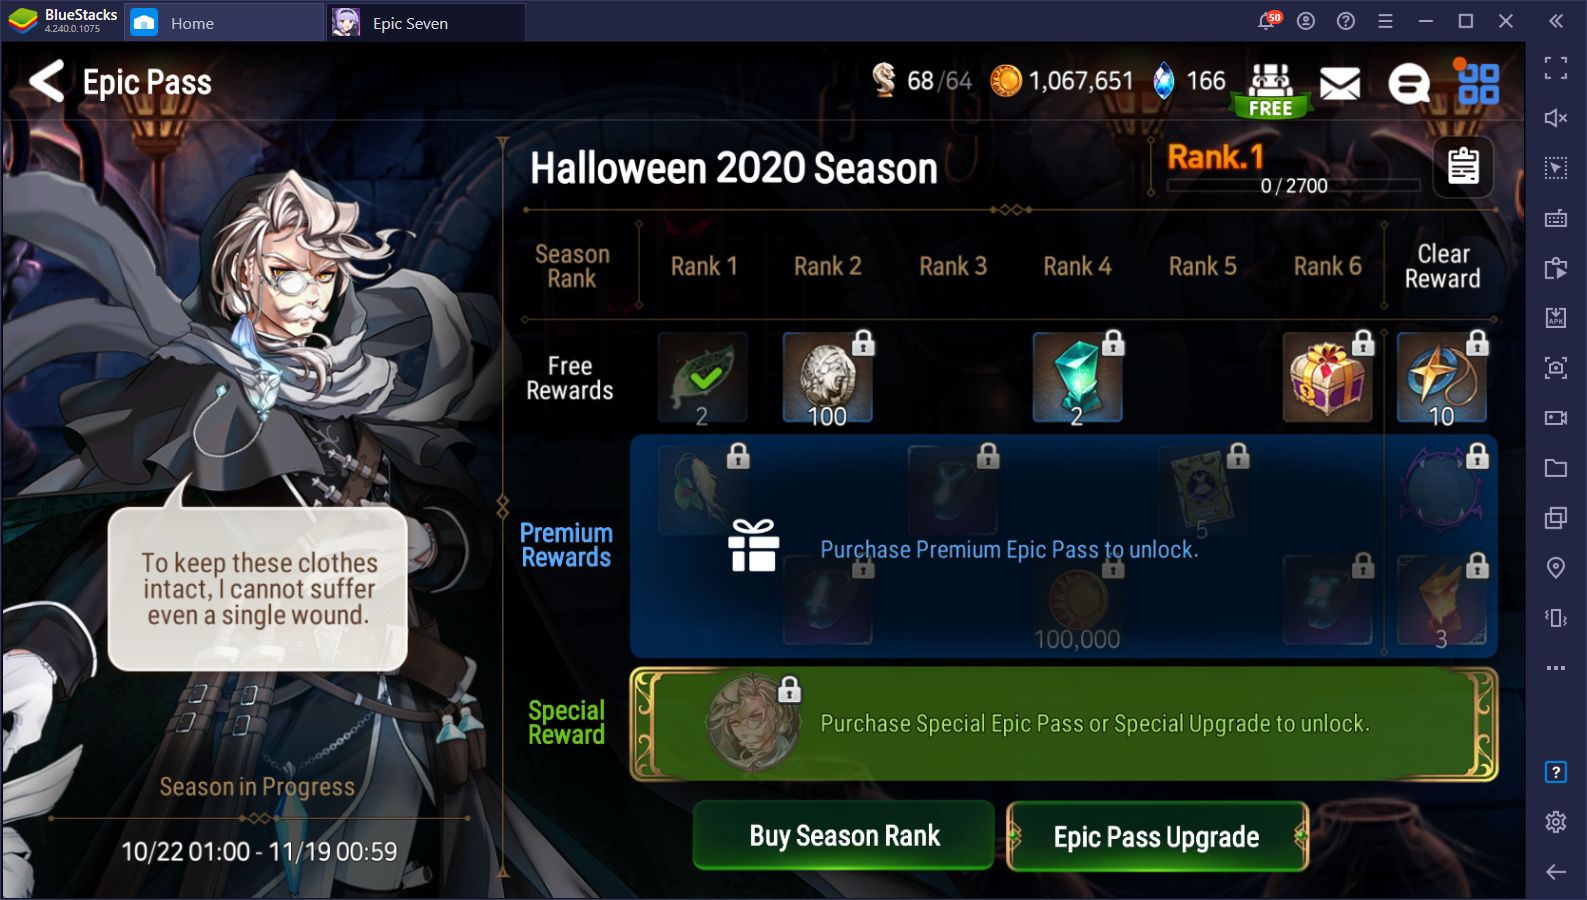 Epic Seven Halloween 2020 - Exclusive Epic Pass and Hero Banners